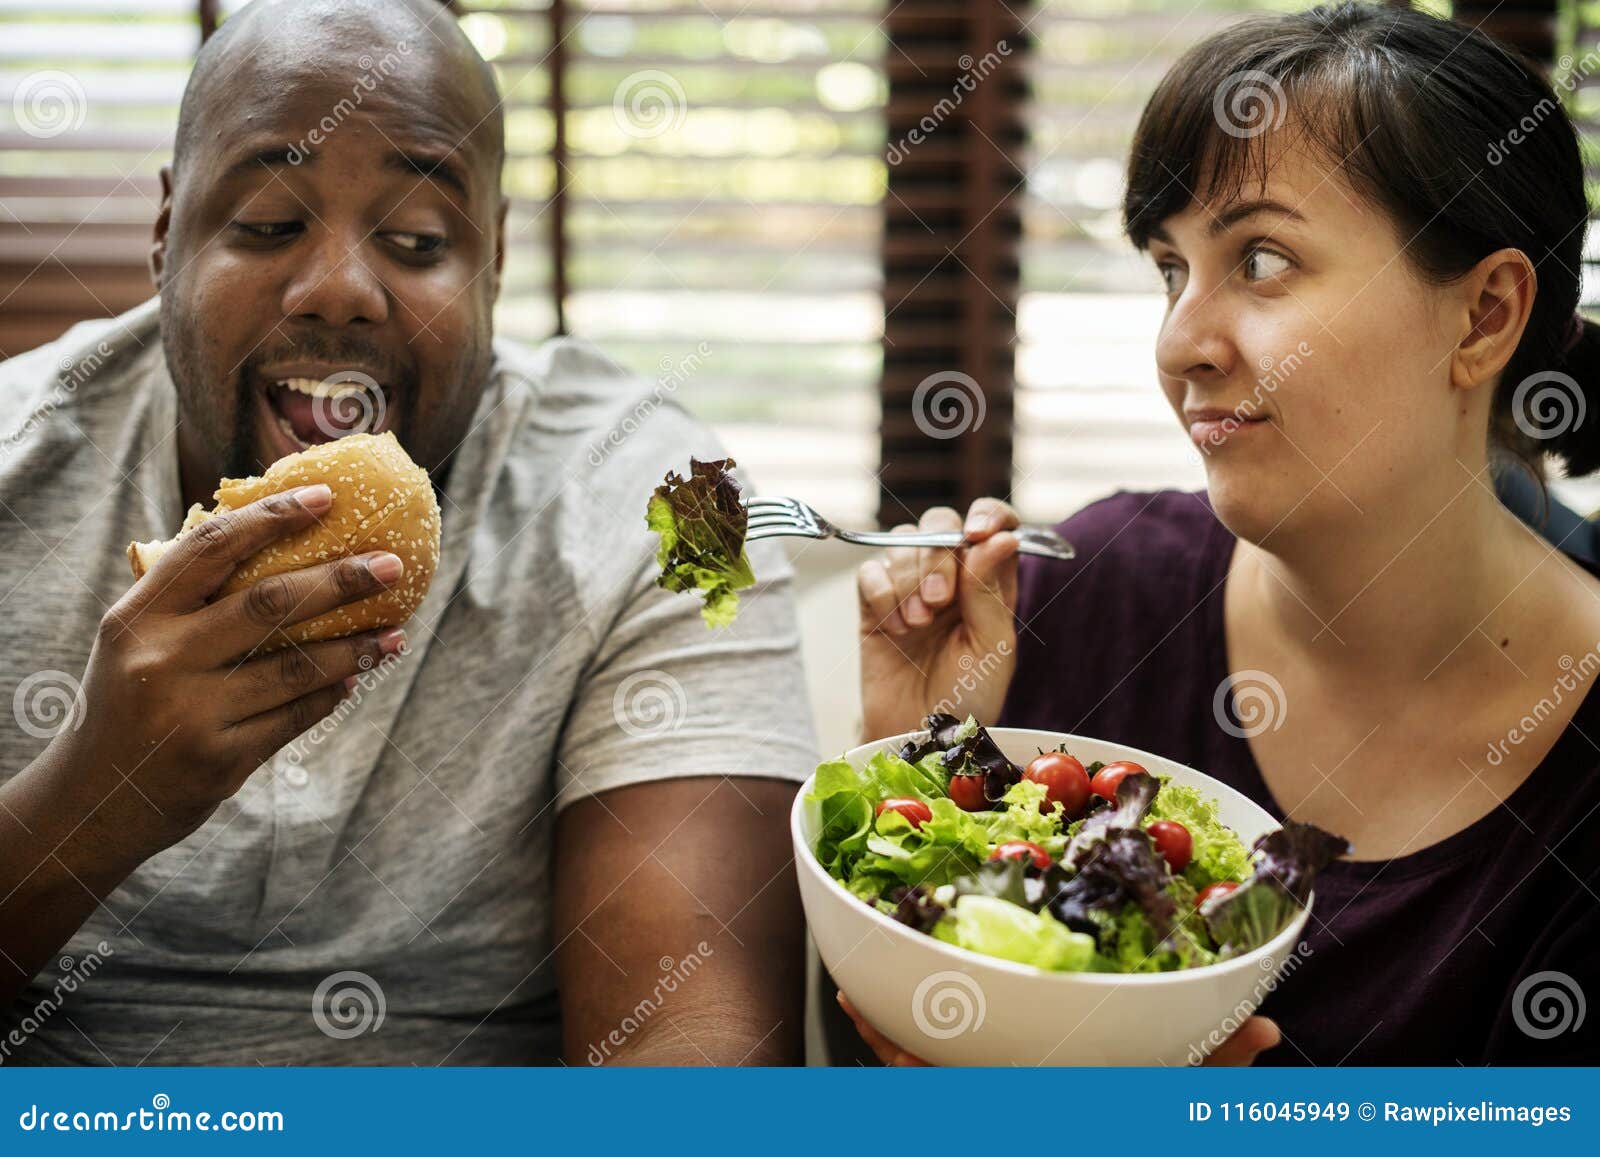 couple having fast food on the couch